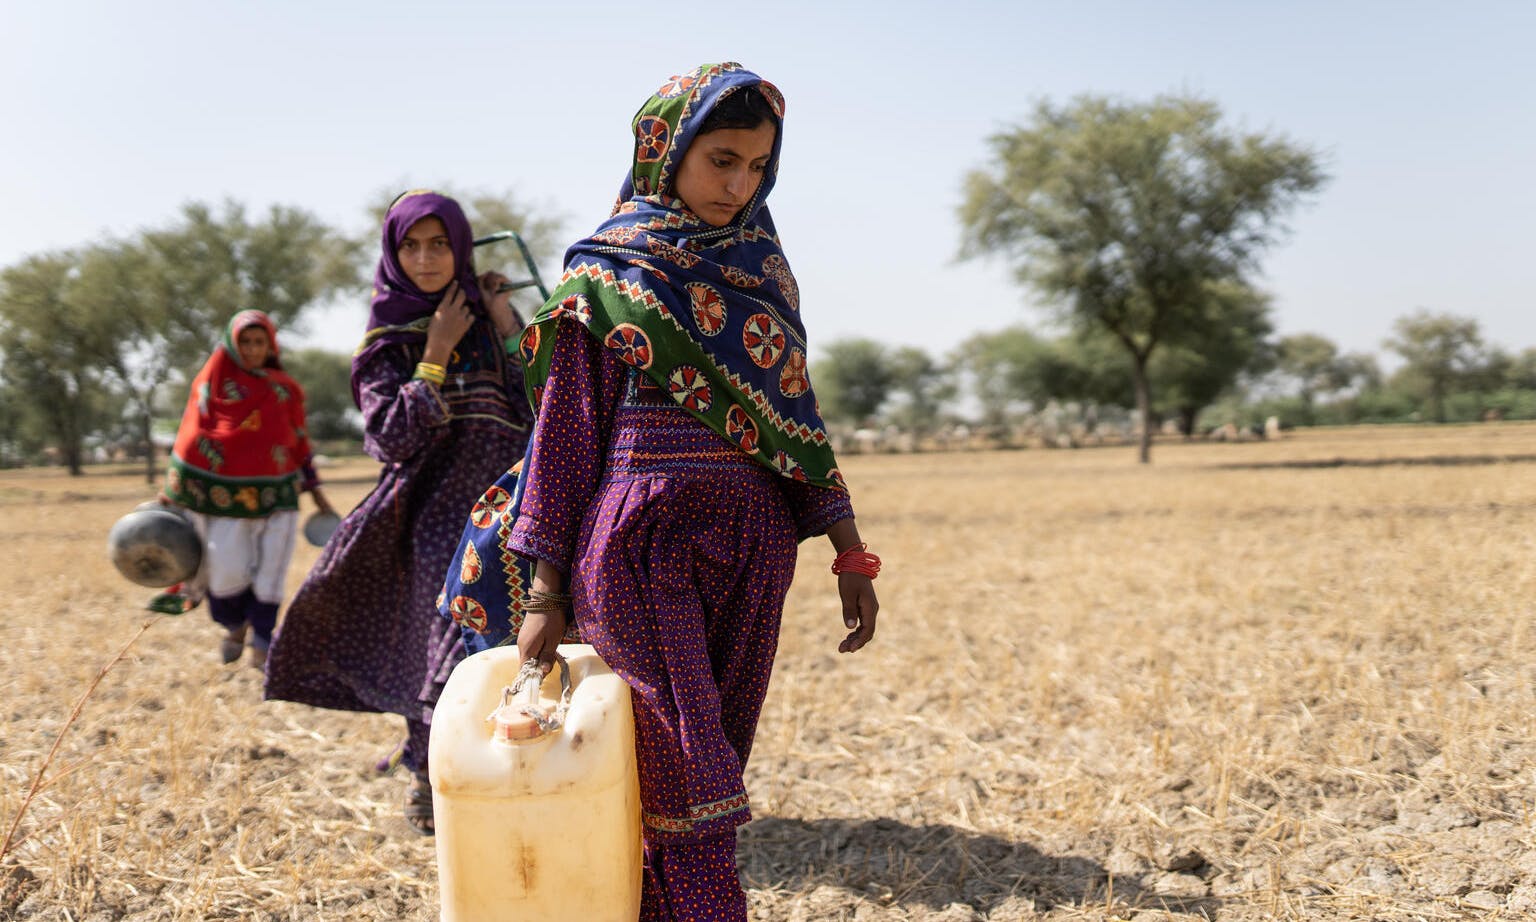 Saima, 10, (right) goes to fetch water with her mother and sister (behind) near a contaminated pond in Allah Abad, Jampur, South Punjab, Pakistan.